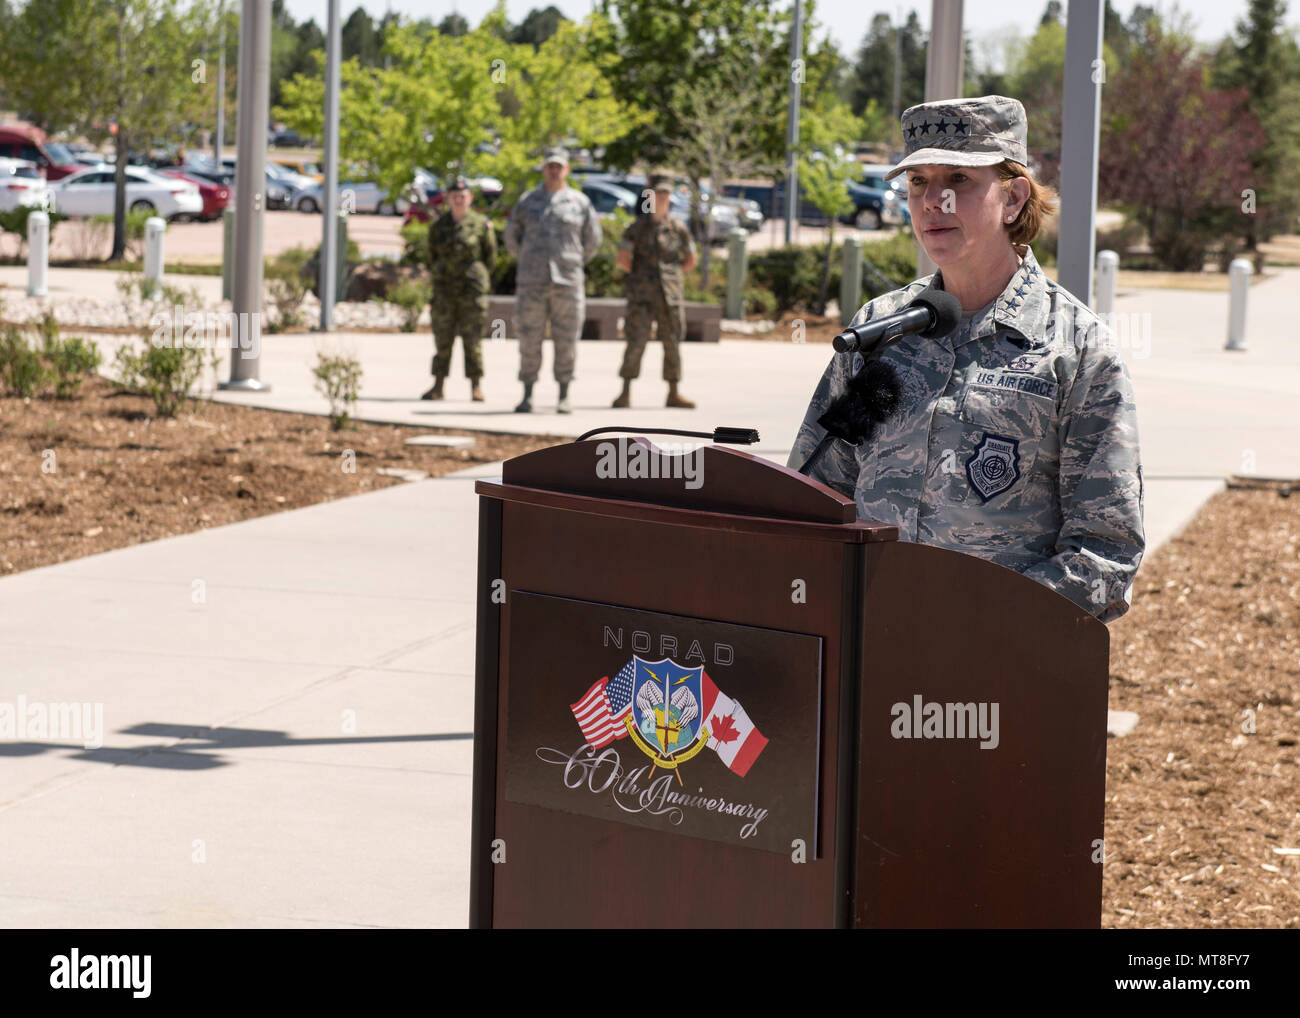 U.S. Air Force General Lori Robinson, Commander of the North American Aerospace Defense Command and U.S. Northern Command speaks during the unveiling ceremony for a memorial cairn outside the NORAD and USNORTHCOM headquarters building on Peterson Air Force Base, Colorado, May 11. The cairn honors the Canadian service men and women who passed away while serving at NORAD in Colorado Springs. The placement and dedication of the cairn was conducted in conjunction with the 60th Anniversary of NORAD and the U.S. Canadian binational NORAD agreement. (DoD Photo By N&NC Public Affairs) Stock Photo